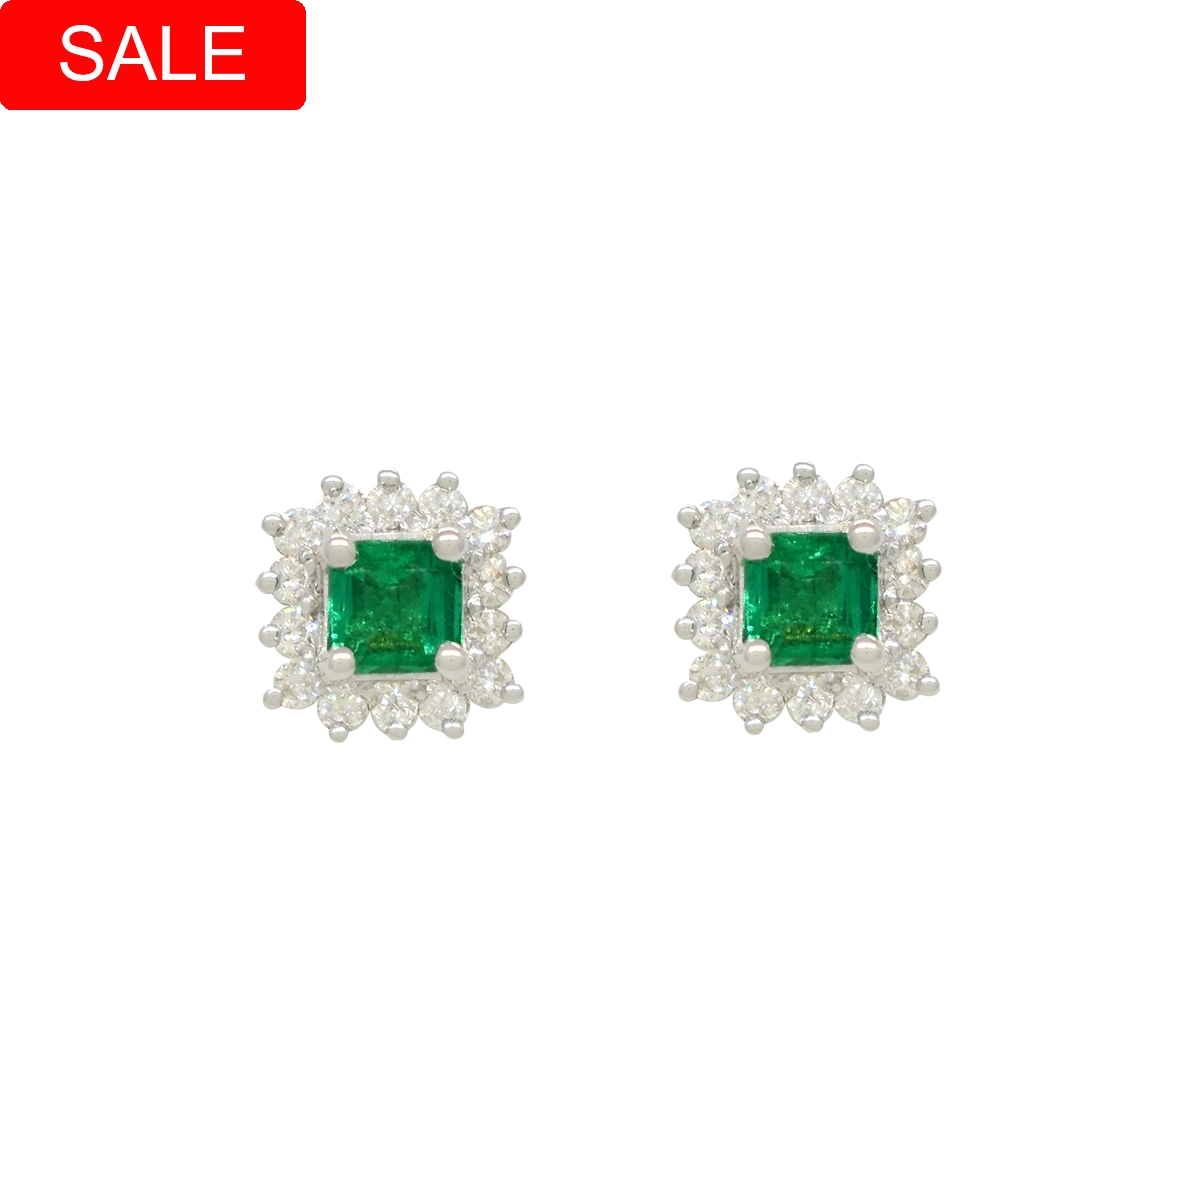 Small Emerald and Diamond Stud Earrings in 18K White Gold